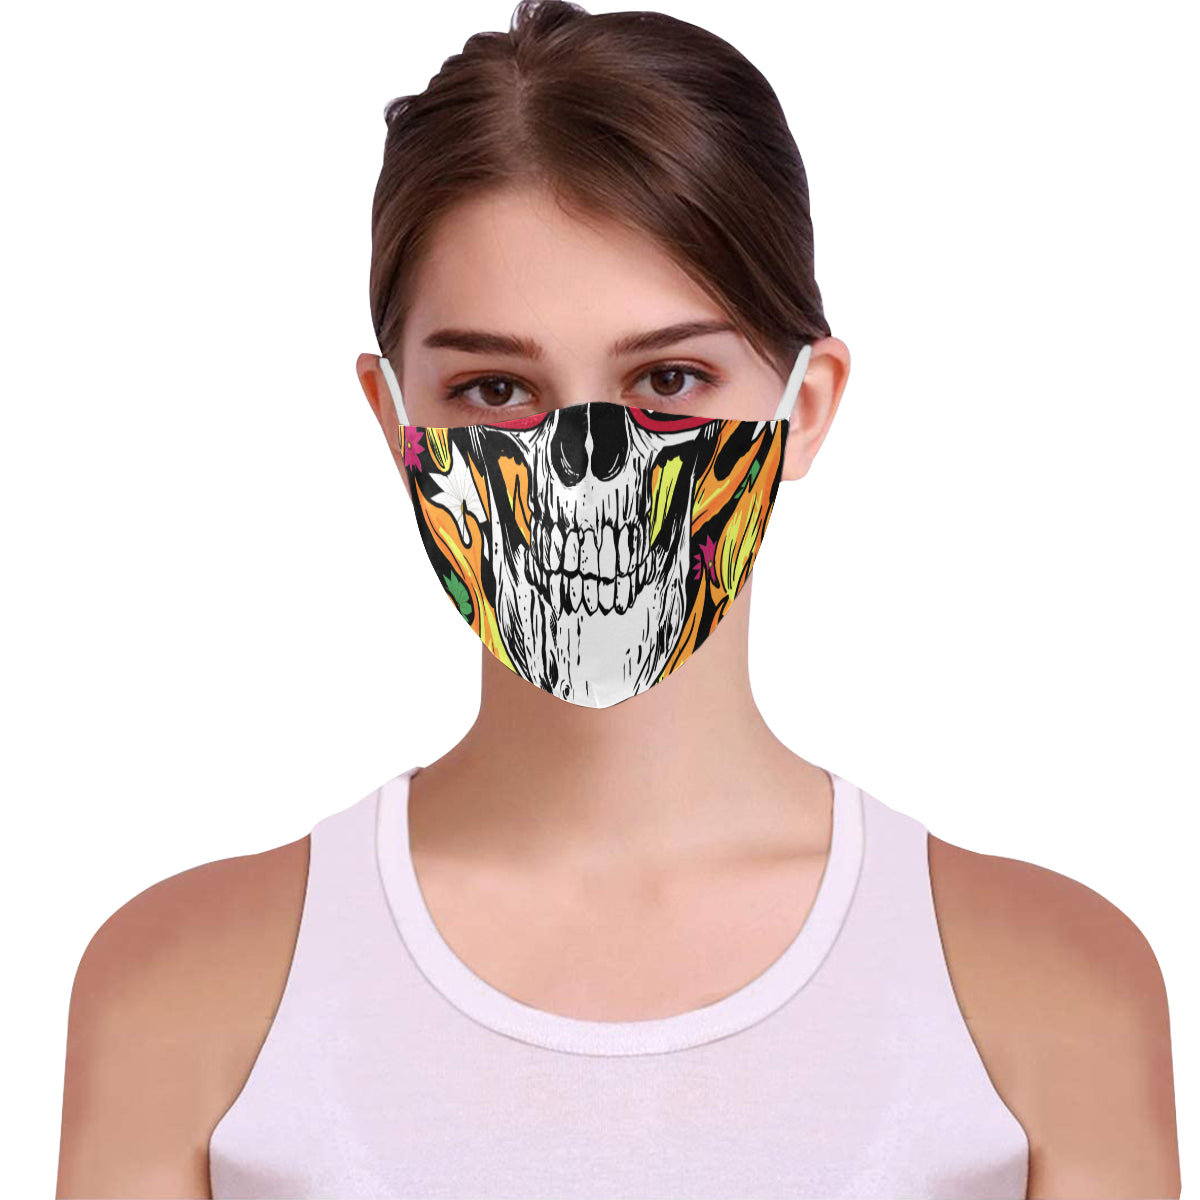 Skeletor FM 5 Cotton Fabric Face Mask with Filter Slot & Adjustable Strap (Pack of 5) - Non-medical use